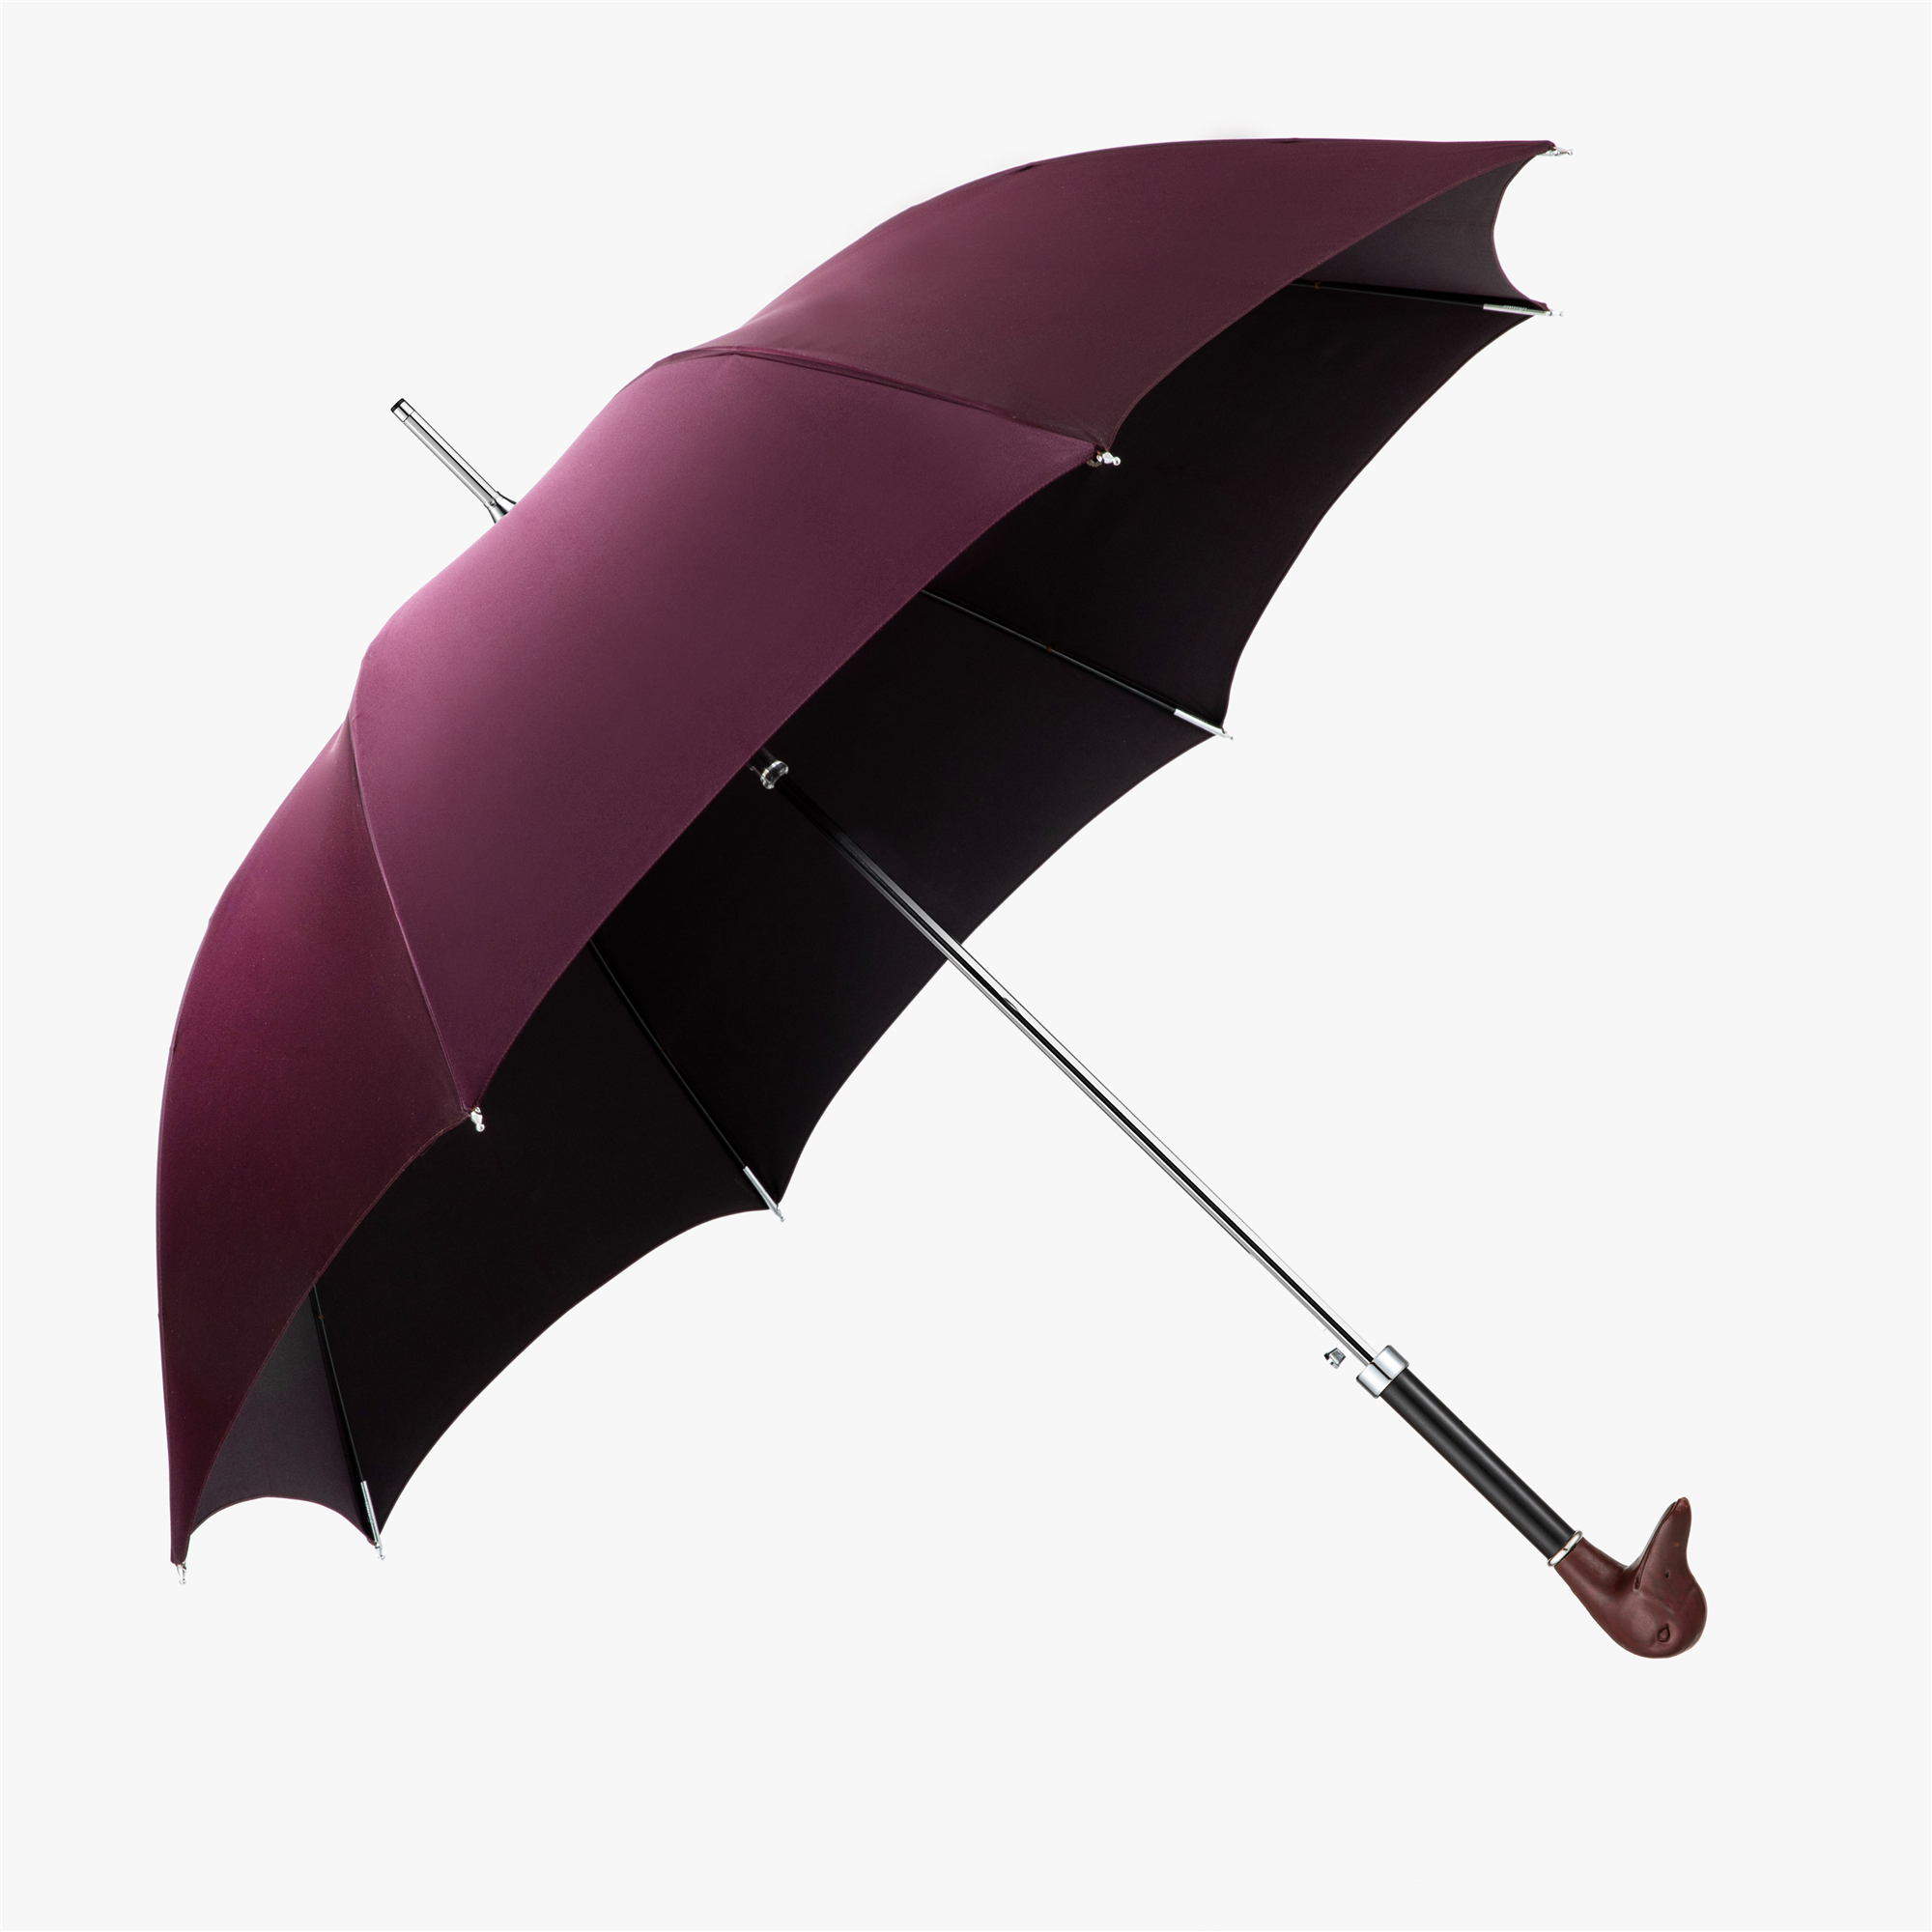 Wooden duck umbrella with straight handle